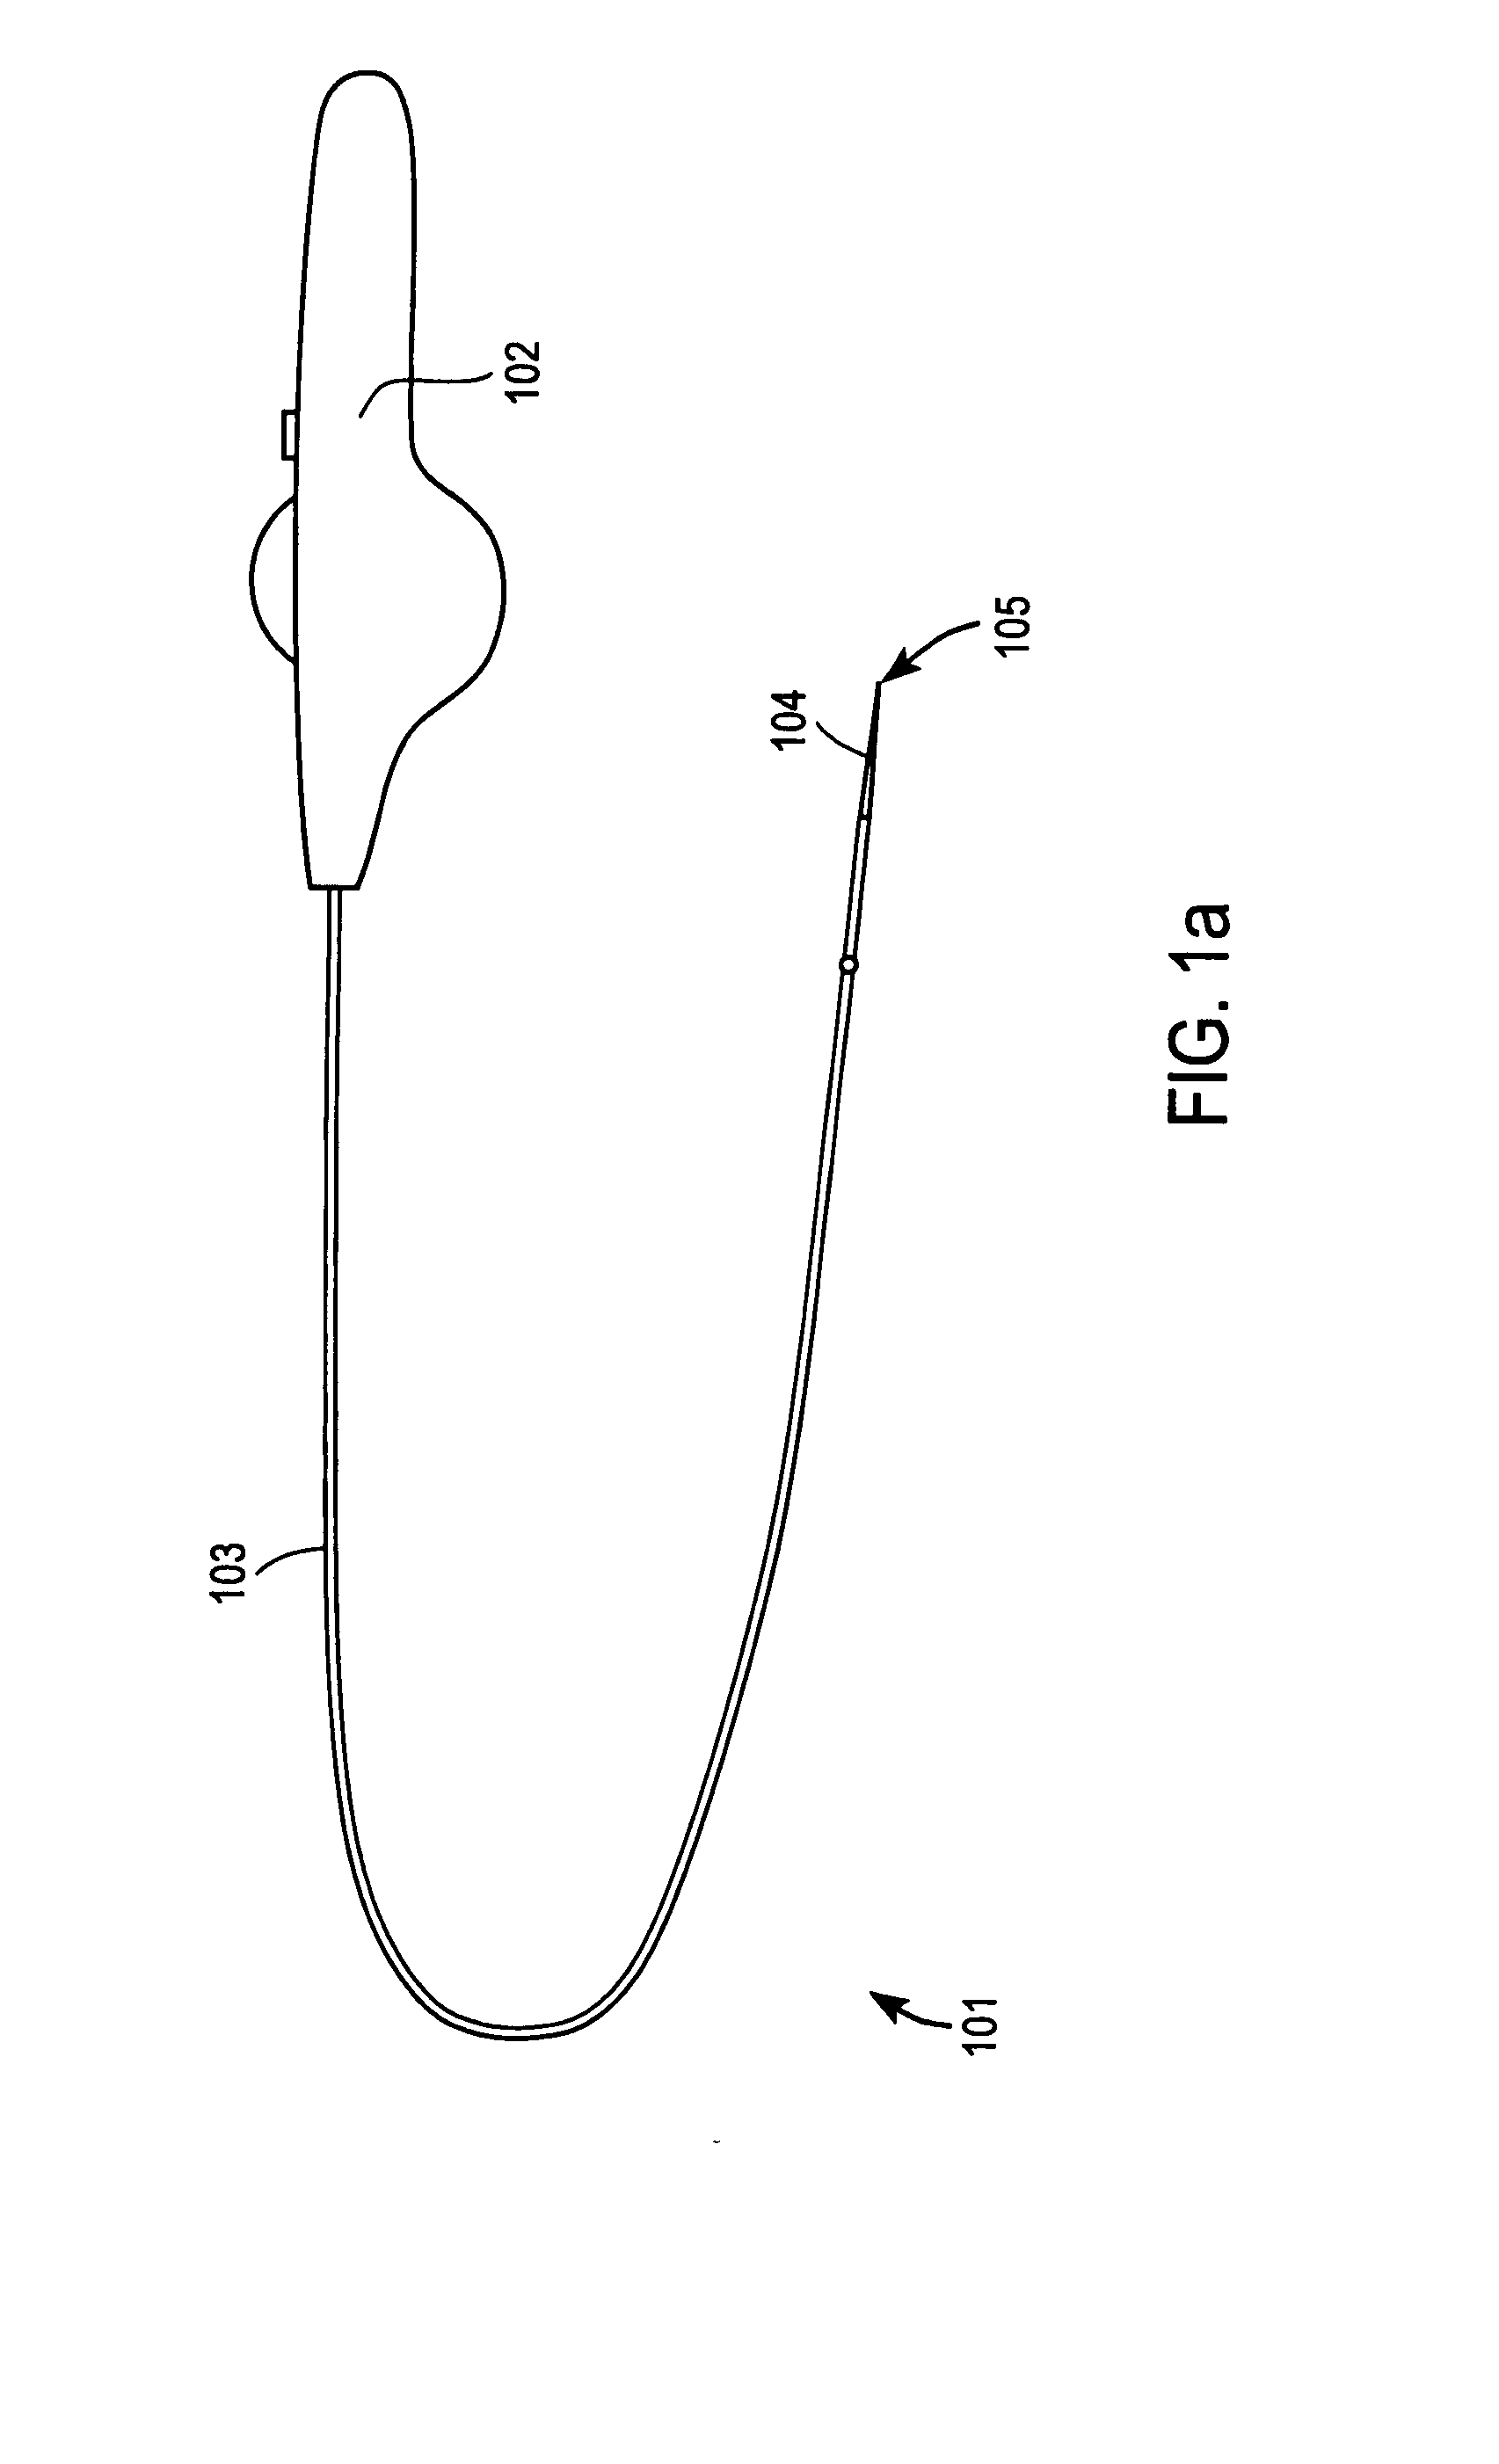 Minimally invasive surgical stabilization devices and methods